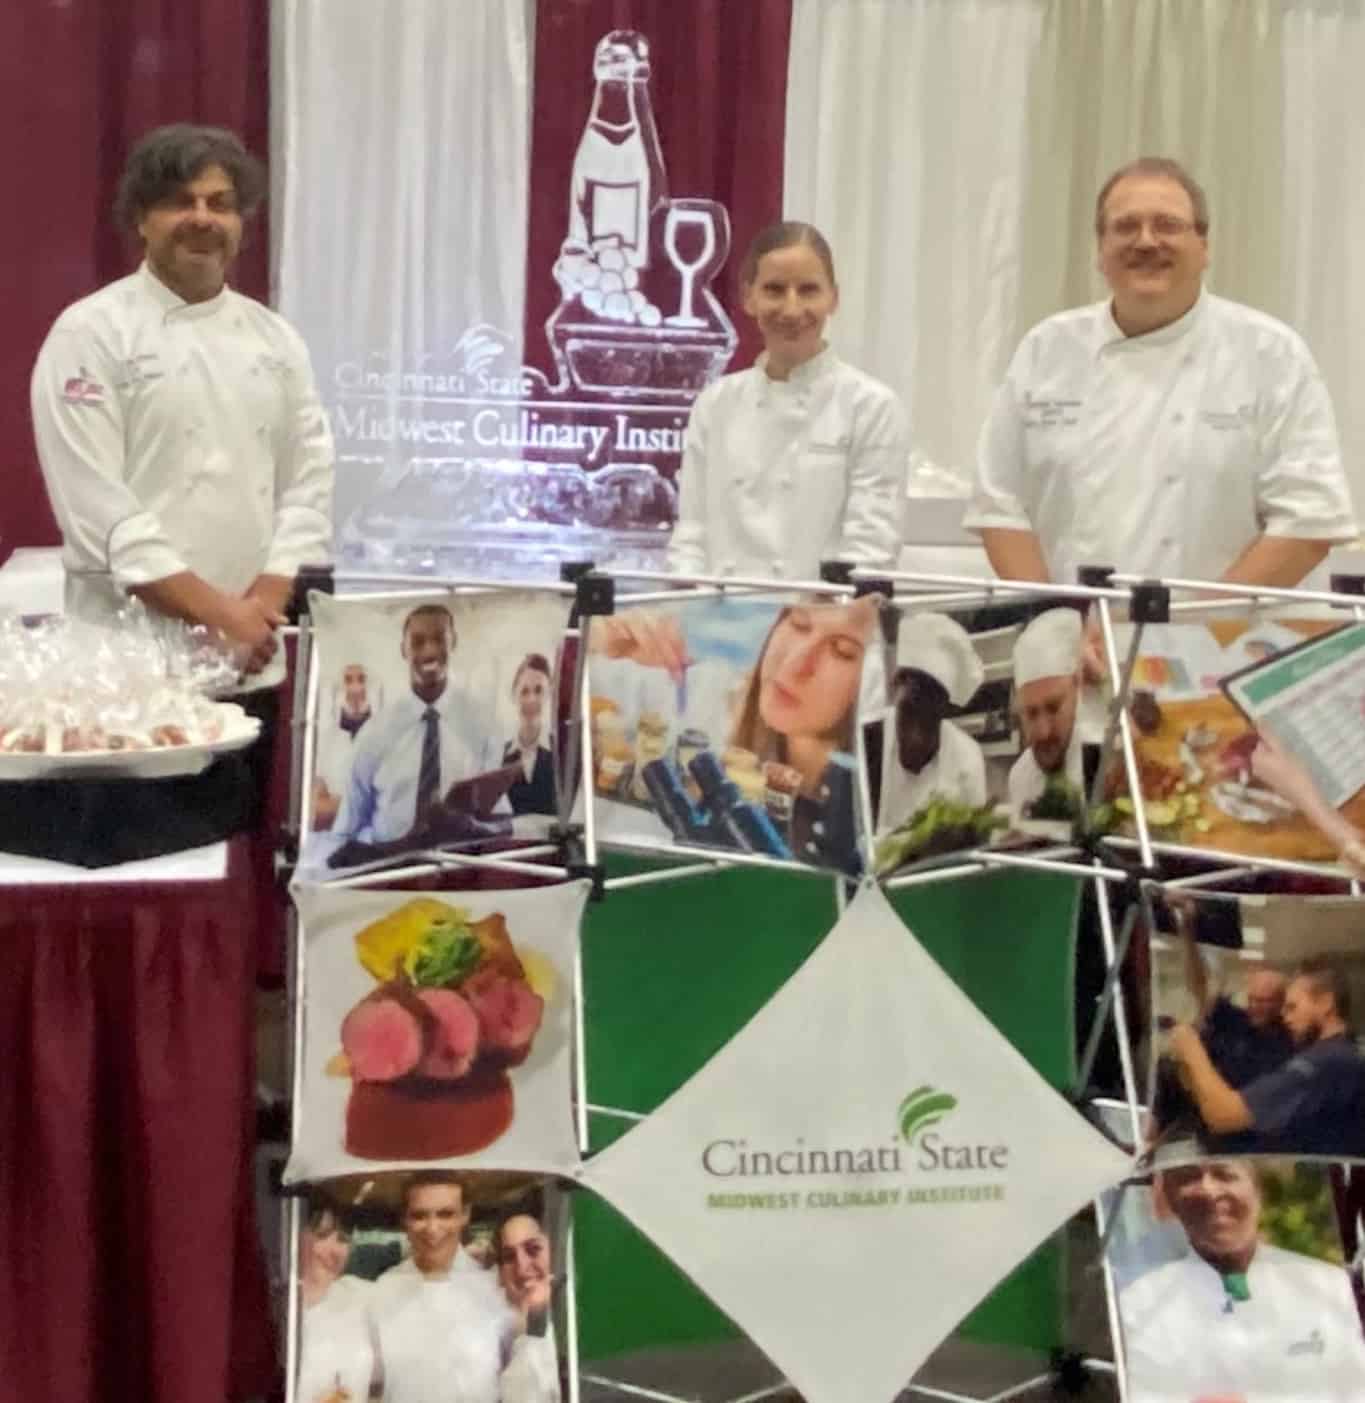 Photo of Midwest Culinary Institute booth at Wine Festival